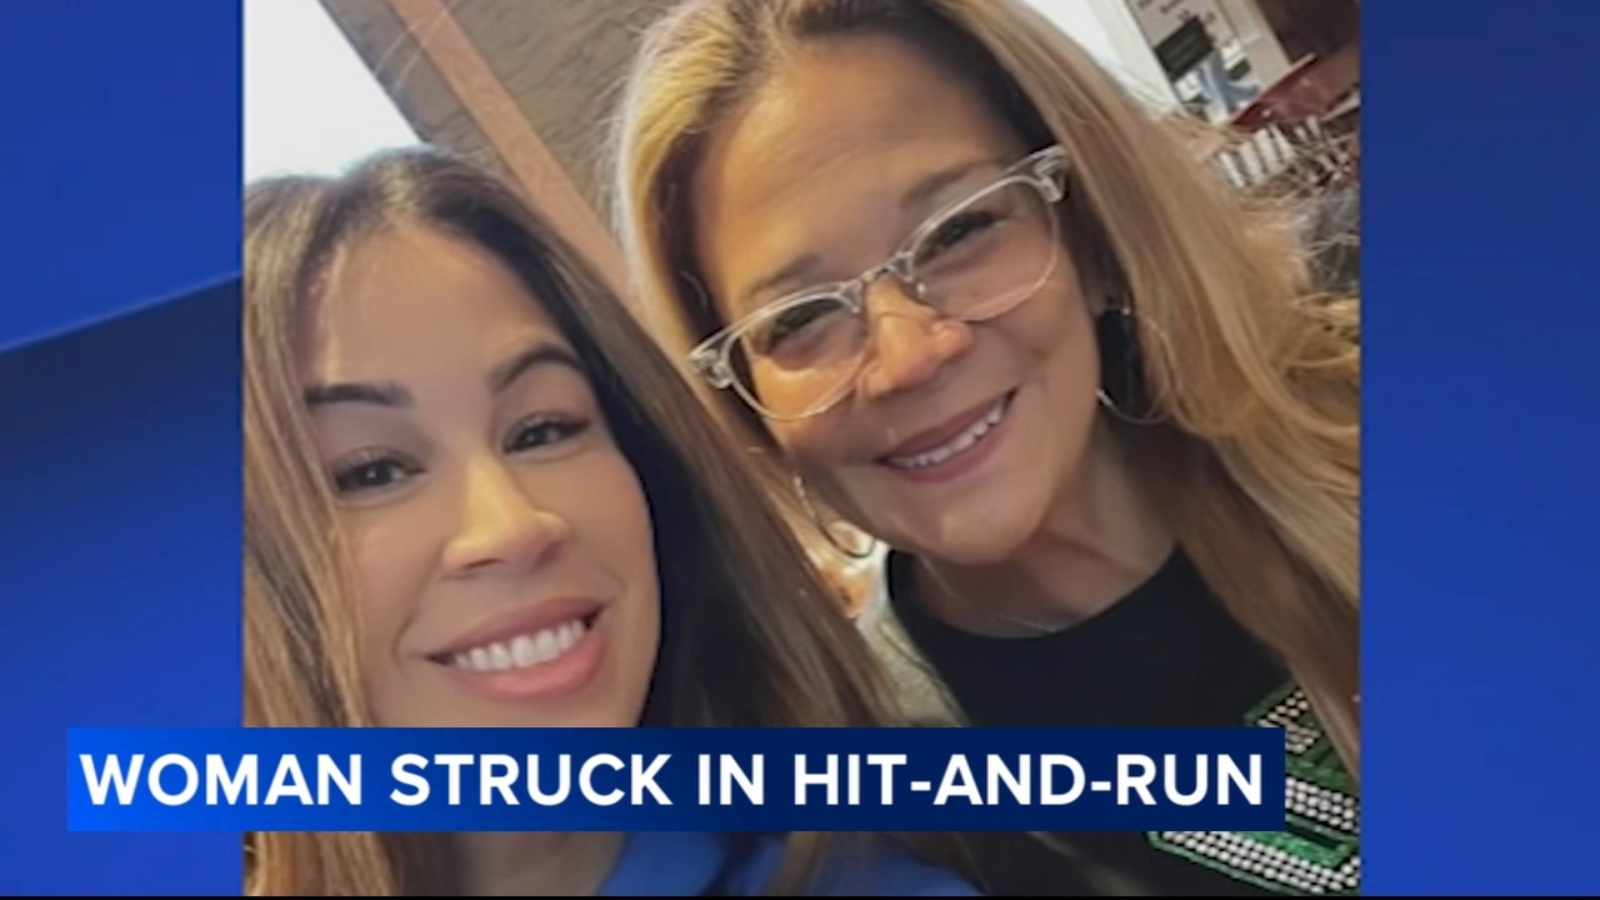 Darlene Wilson crash: Philadelphia grandma severely injured in University City hit-and-run; Daughter searches for answers [Video]